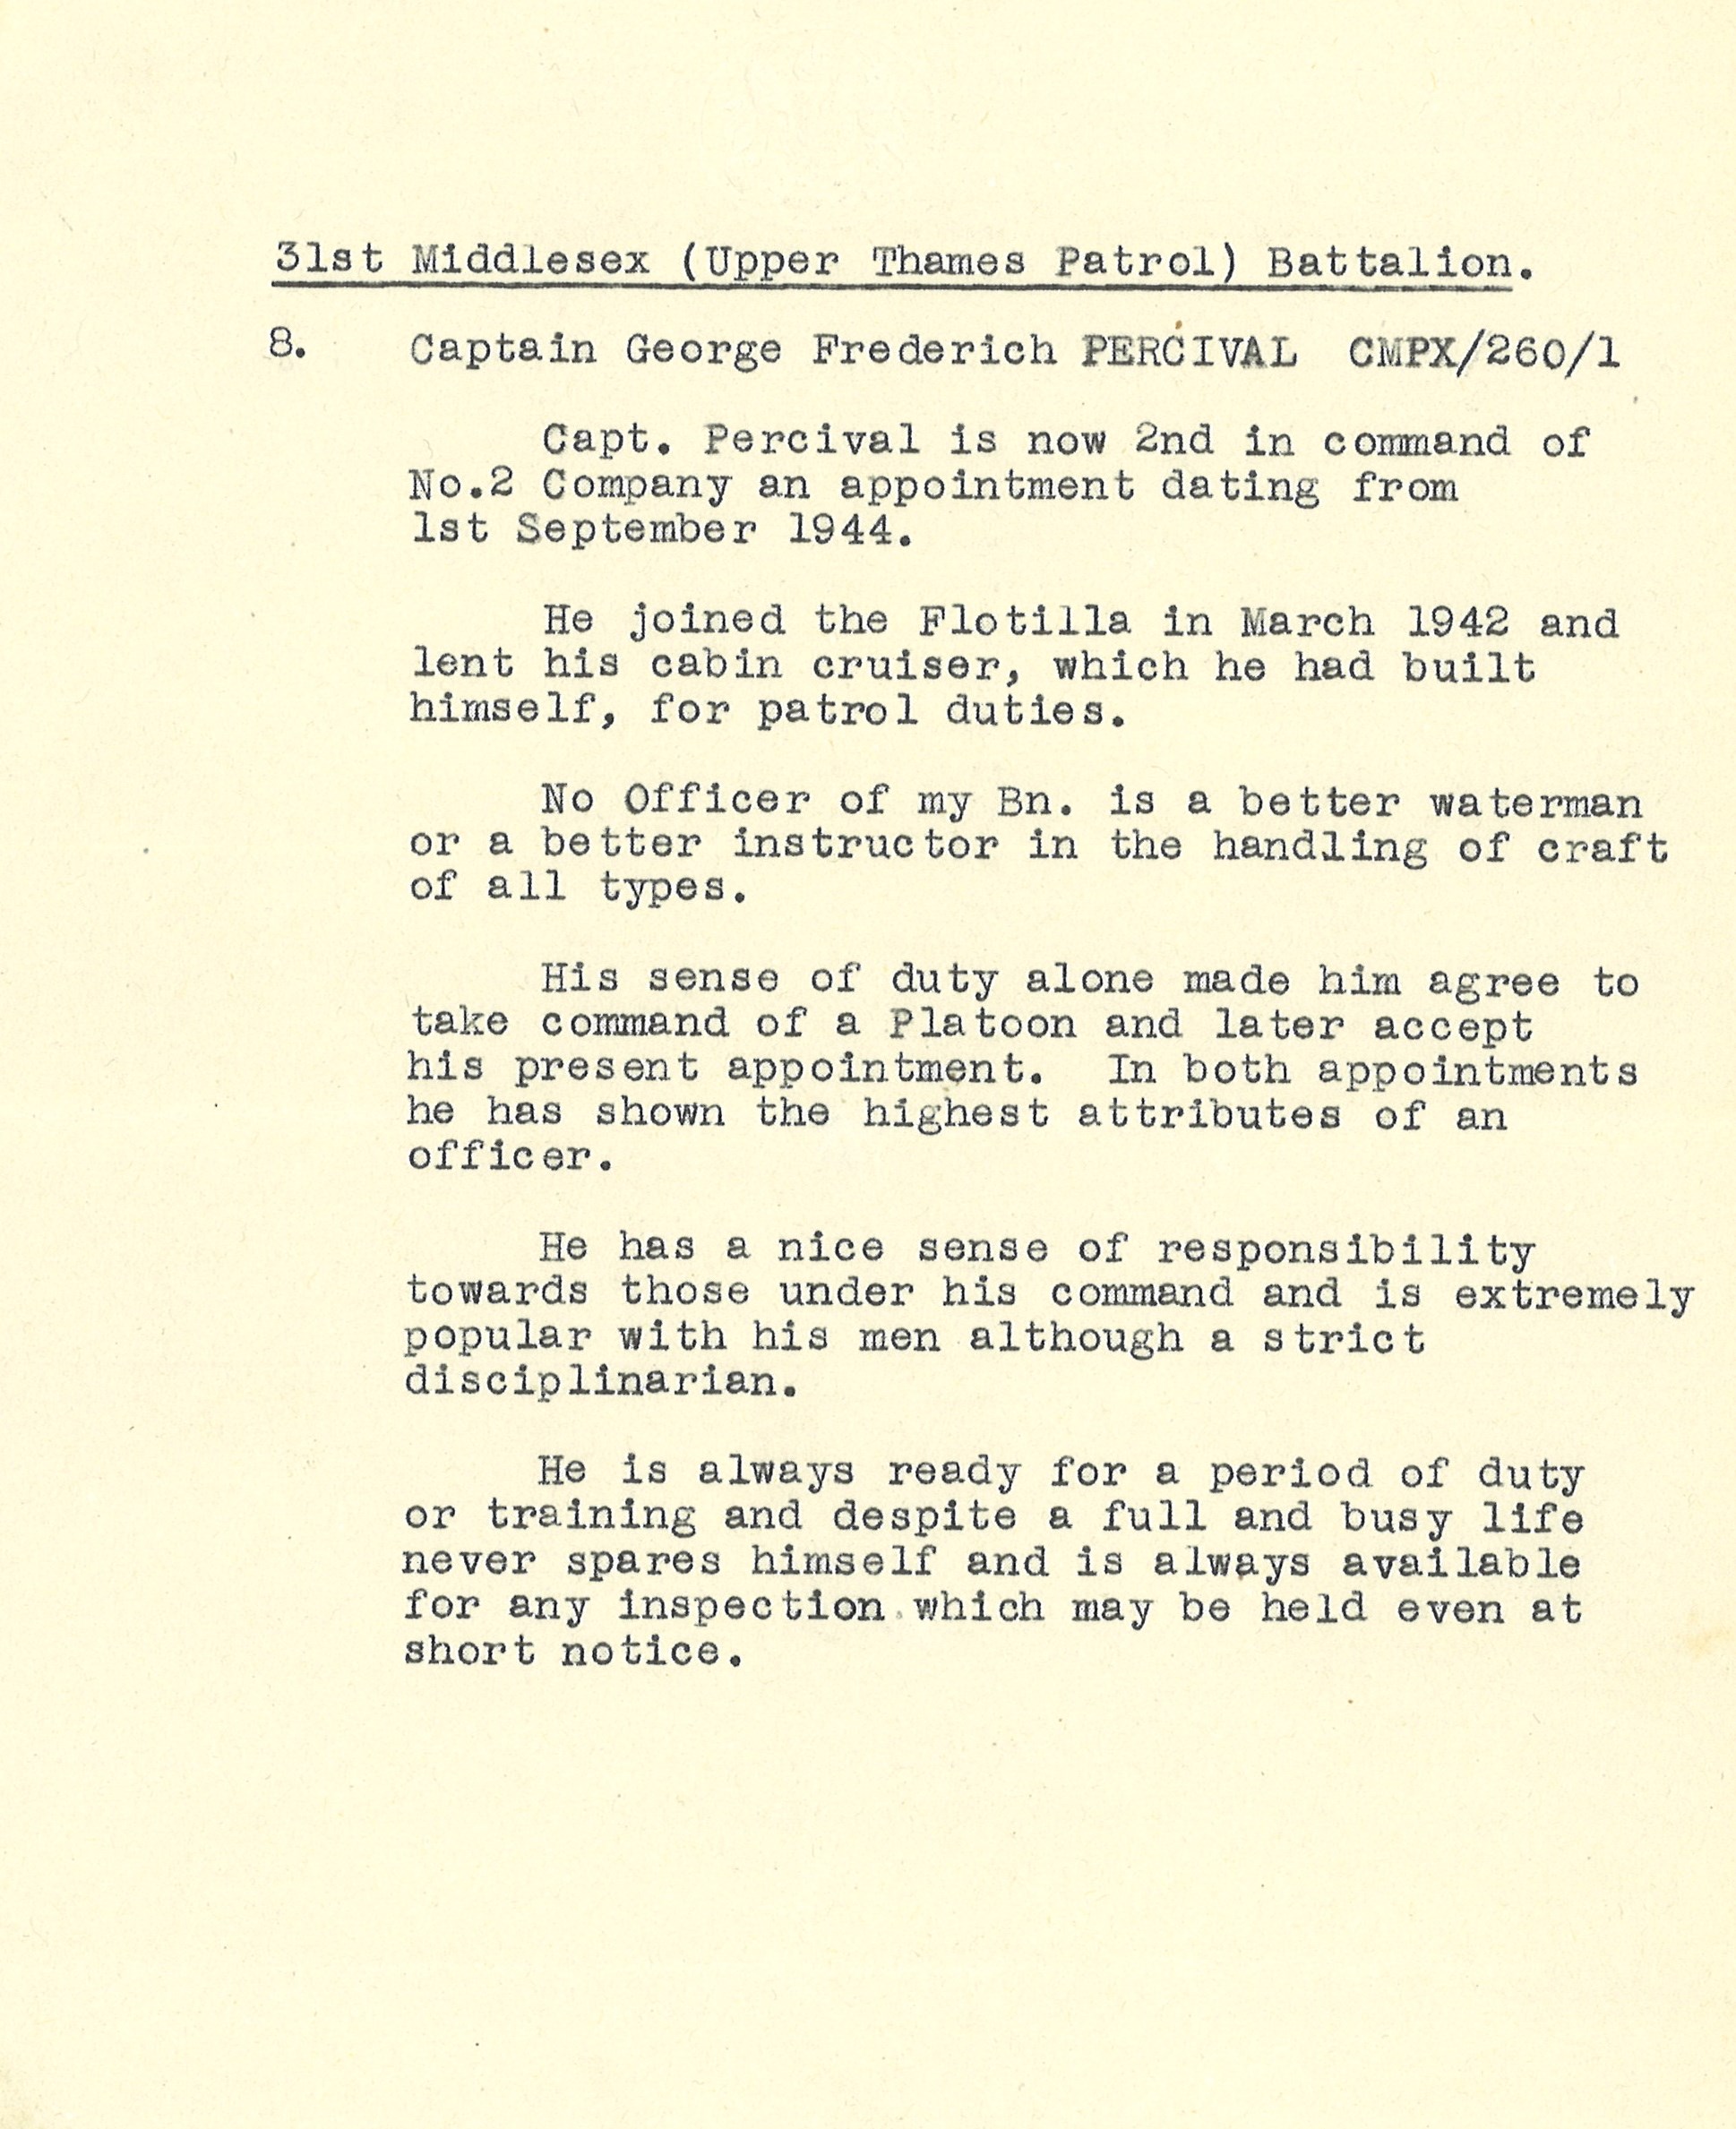 Typewritten recommendation for Captain George Frederich Percival